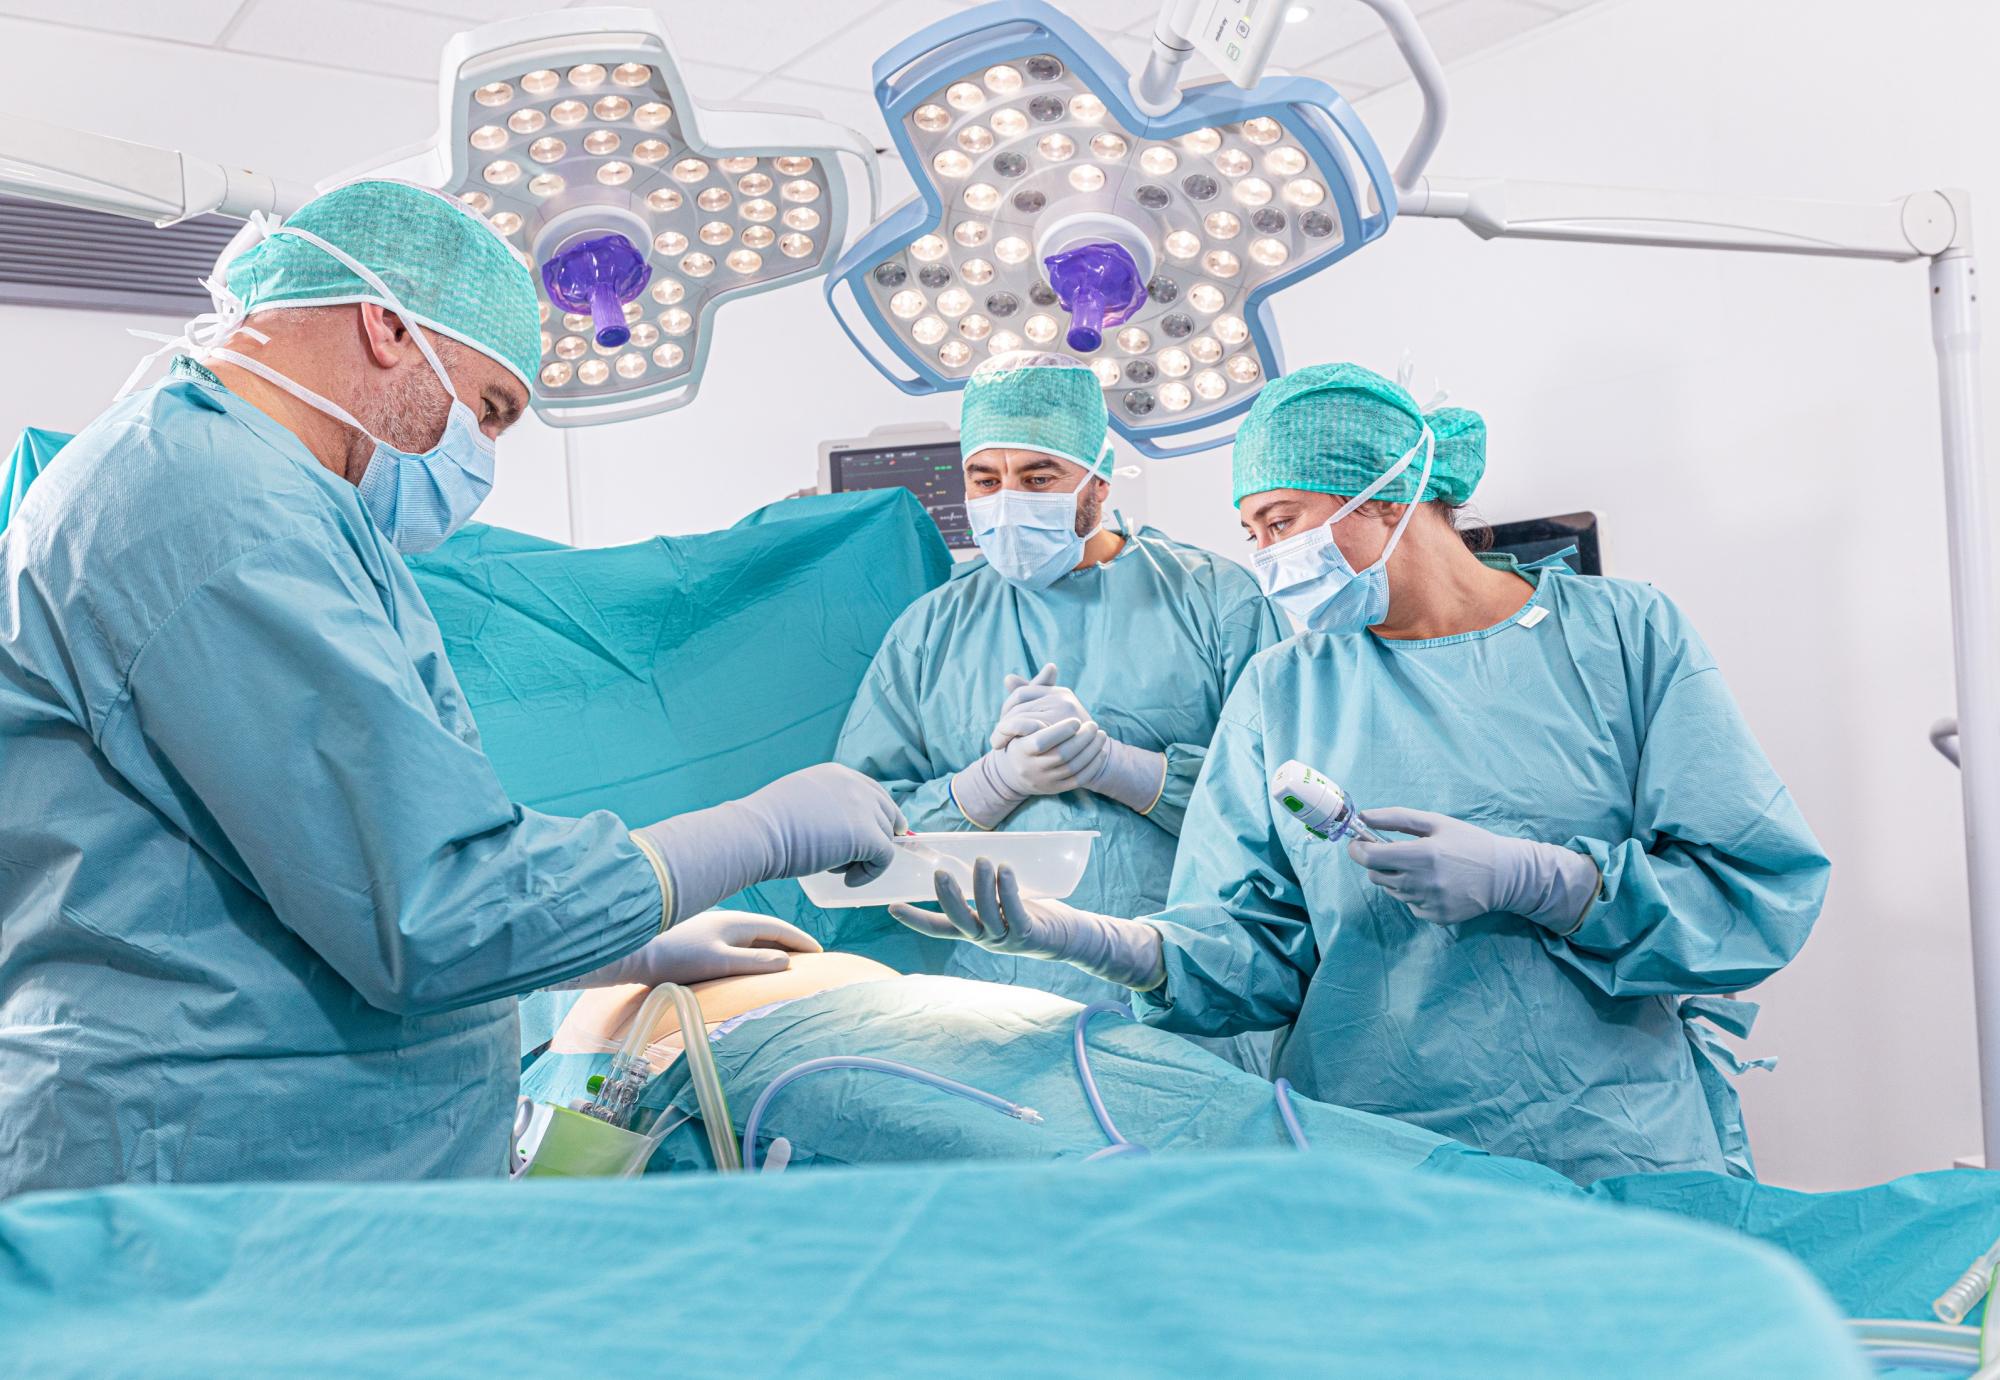 Surgical team performing an operation on a patient